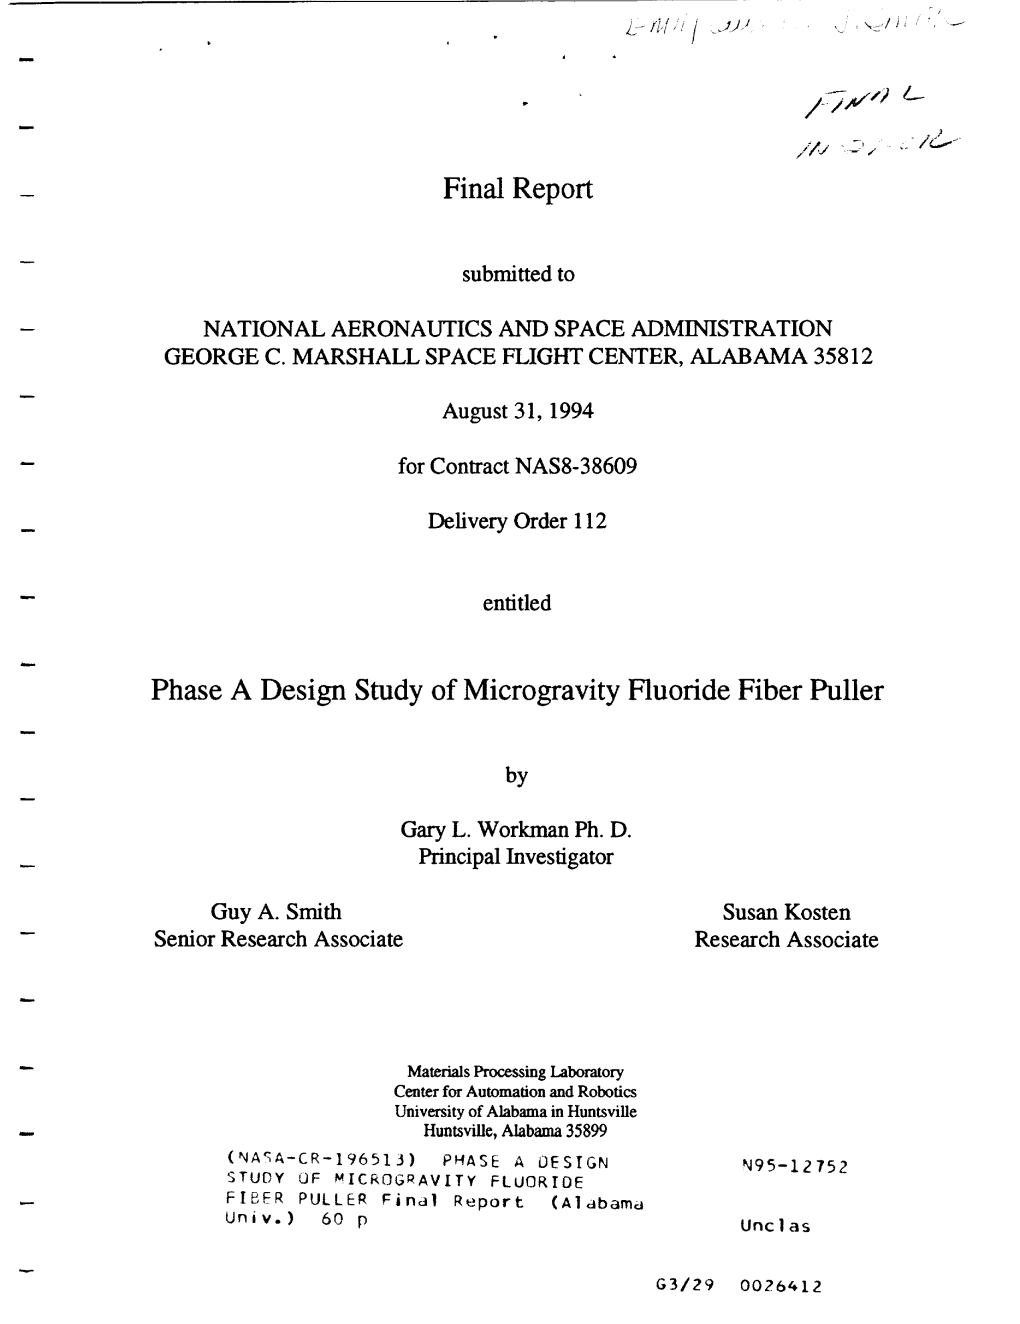 Final Report Phase a Design Study of Microgravity Fluoride Fiber Puller